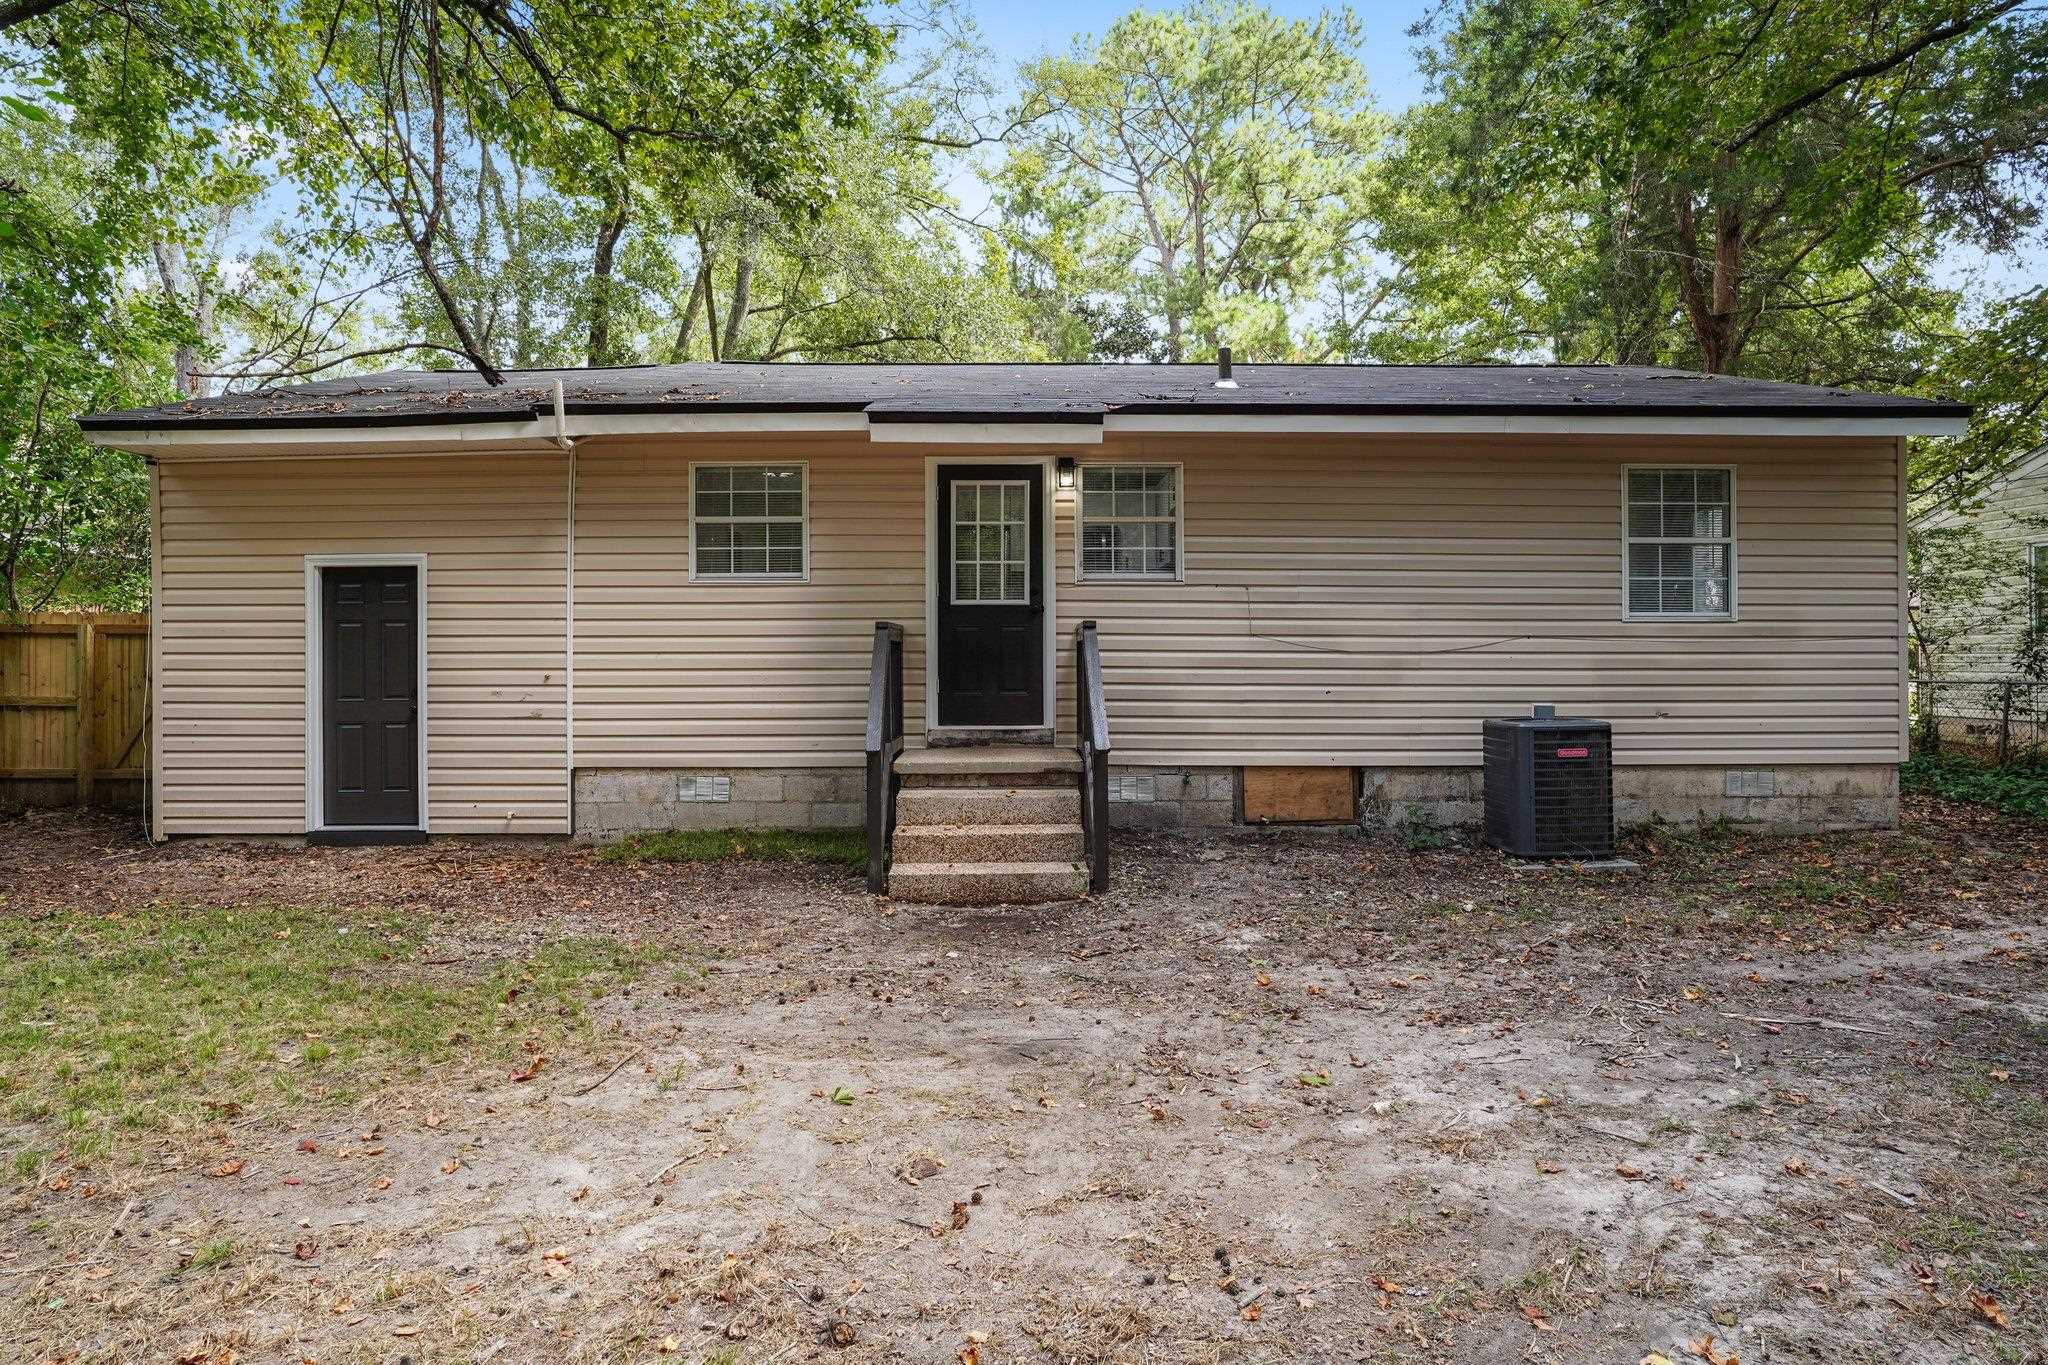 2804 Southwood Drive,TALLAHASSEE,Florida 32301,4 Bedrooms Bedrooms,1 BathroomBathrooms,Detached single family,2804 Southwood Drive,367453